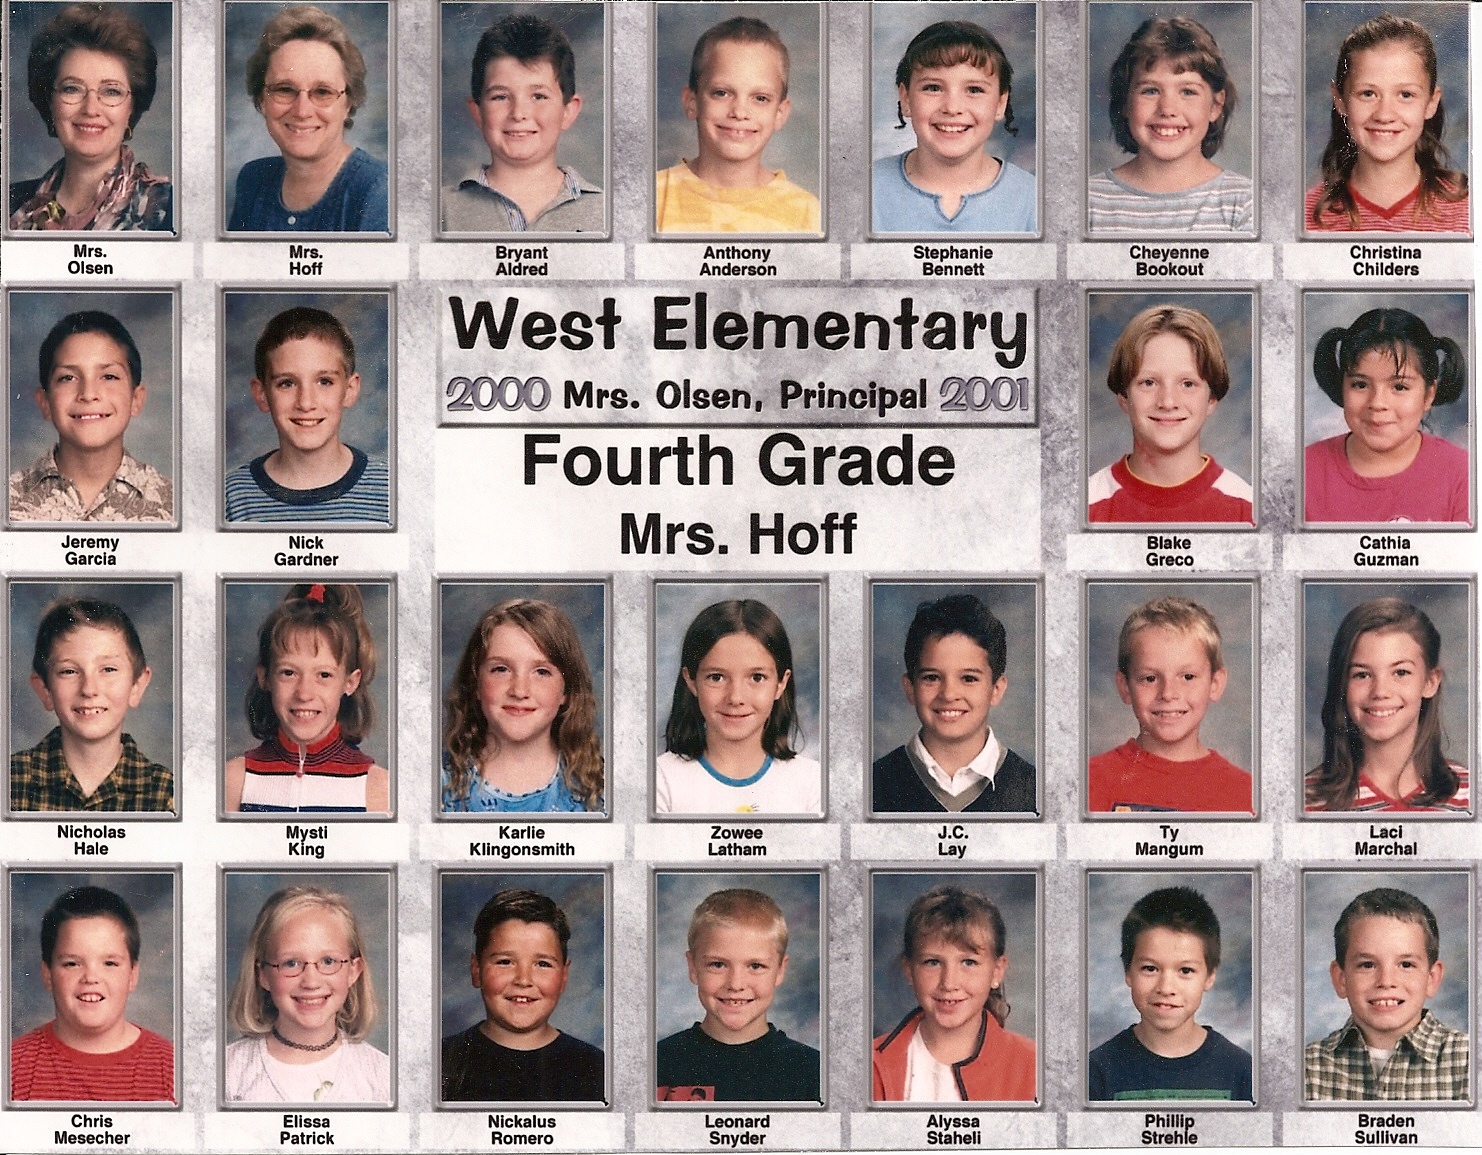 Mrs. Ruth Hoff's 2000-2001 fourth grade class at West Elementary School